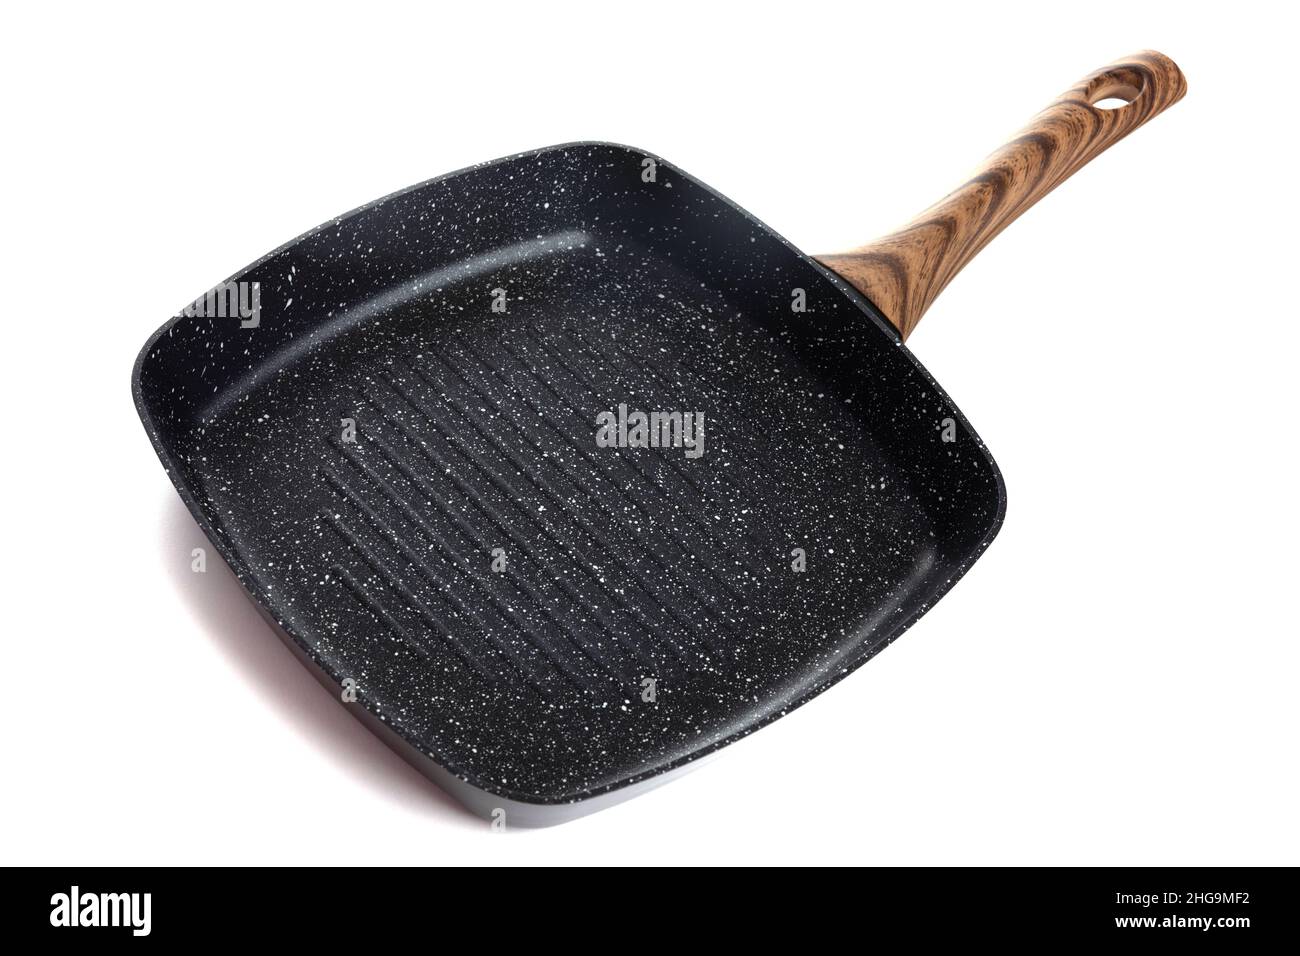 https://c8.alamy.com/comp/2HG9MF2/modern-stylish-kitchen-grill-pan-yes-square-shape-with-a-dark-non-stick-coating-and-a-corrugated-bottom-surface-with-a-brown-handle-on-a-white-2HG9MF2.jpg